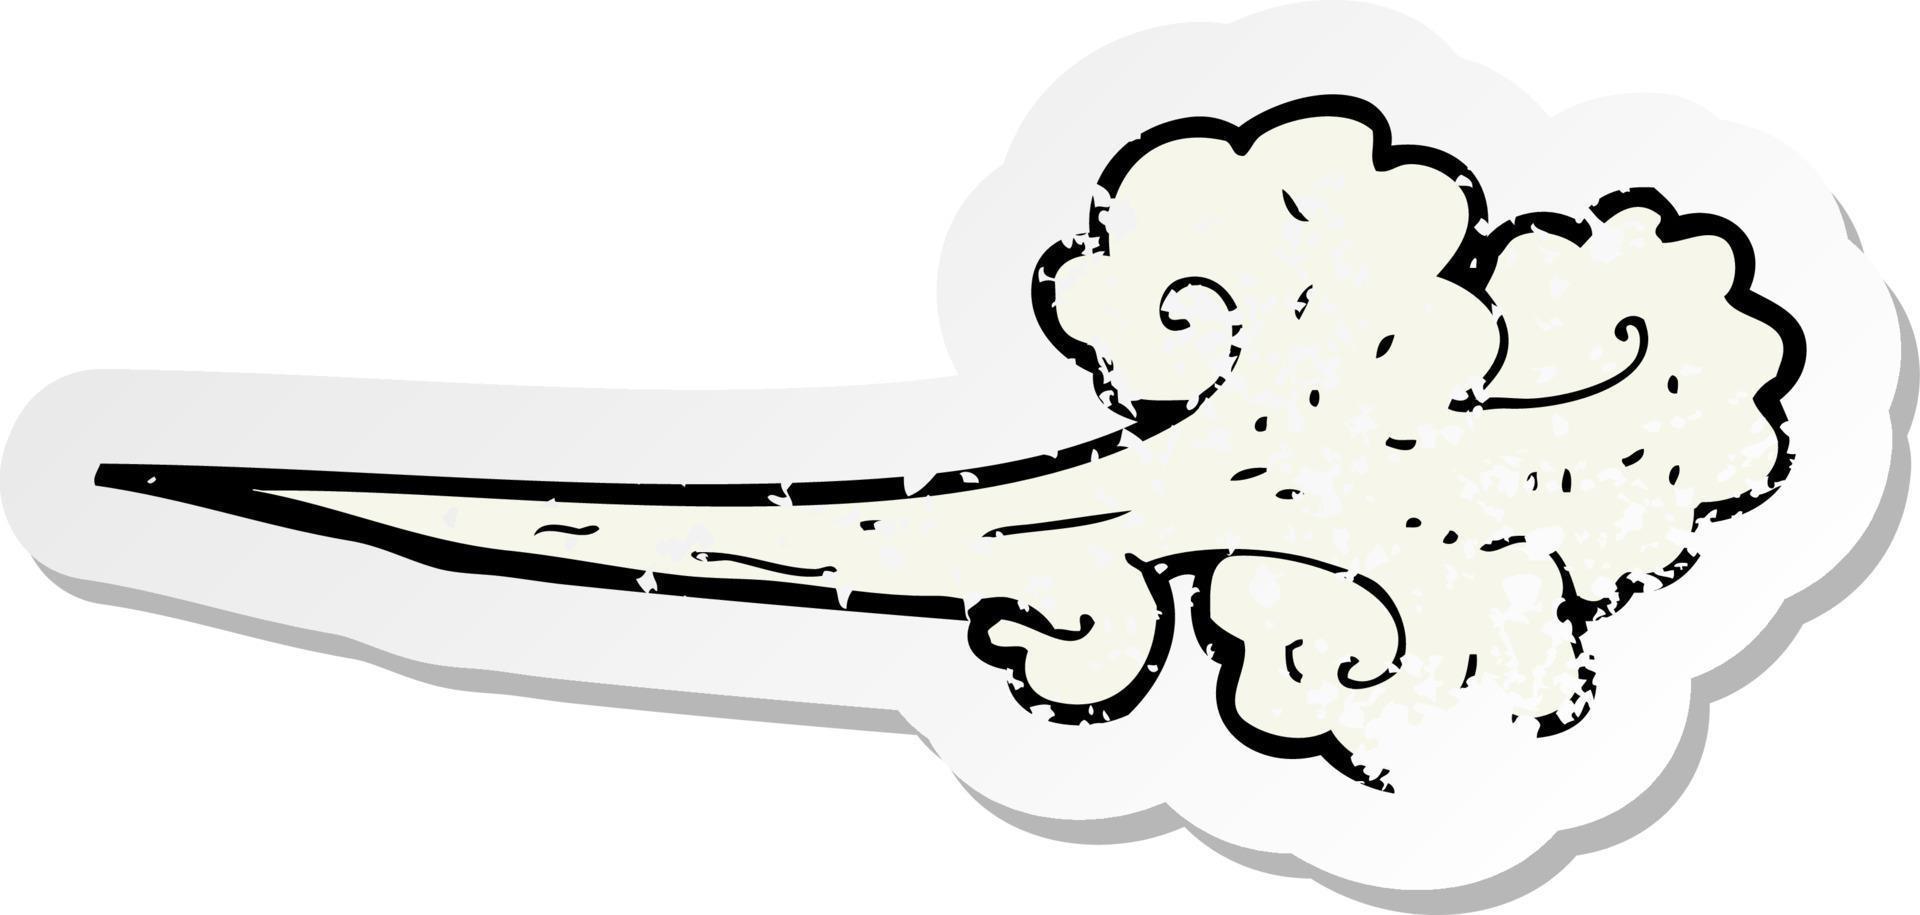 retro distressed sticker of a cartoon gust of wind vector